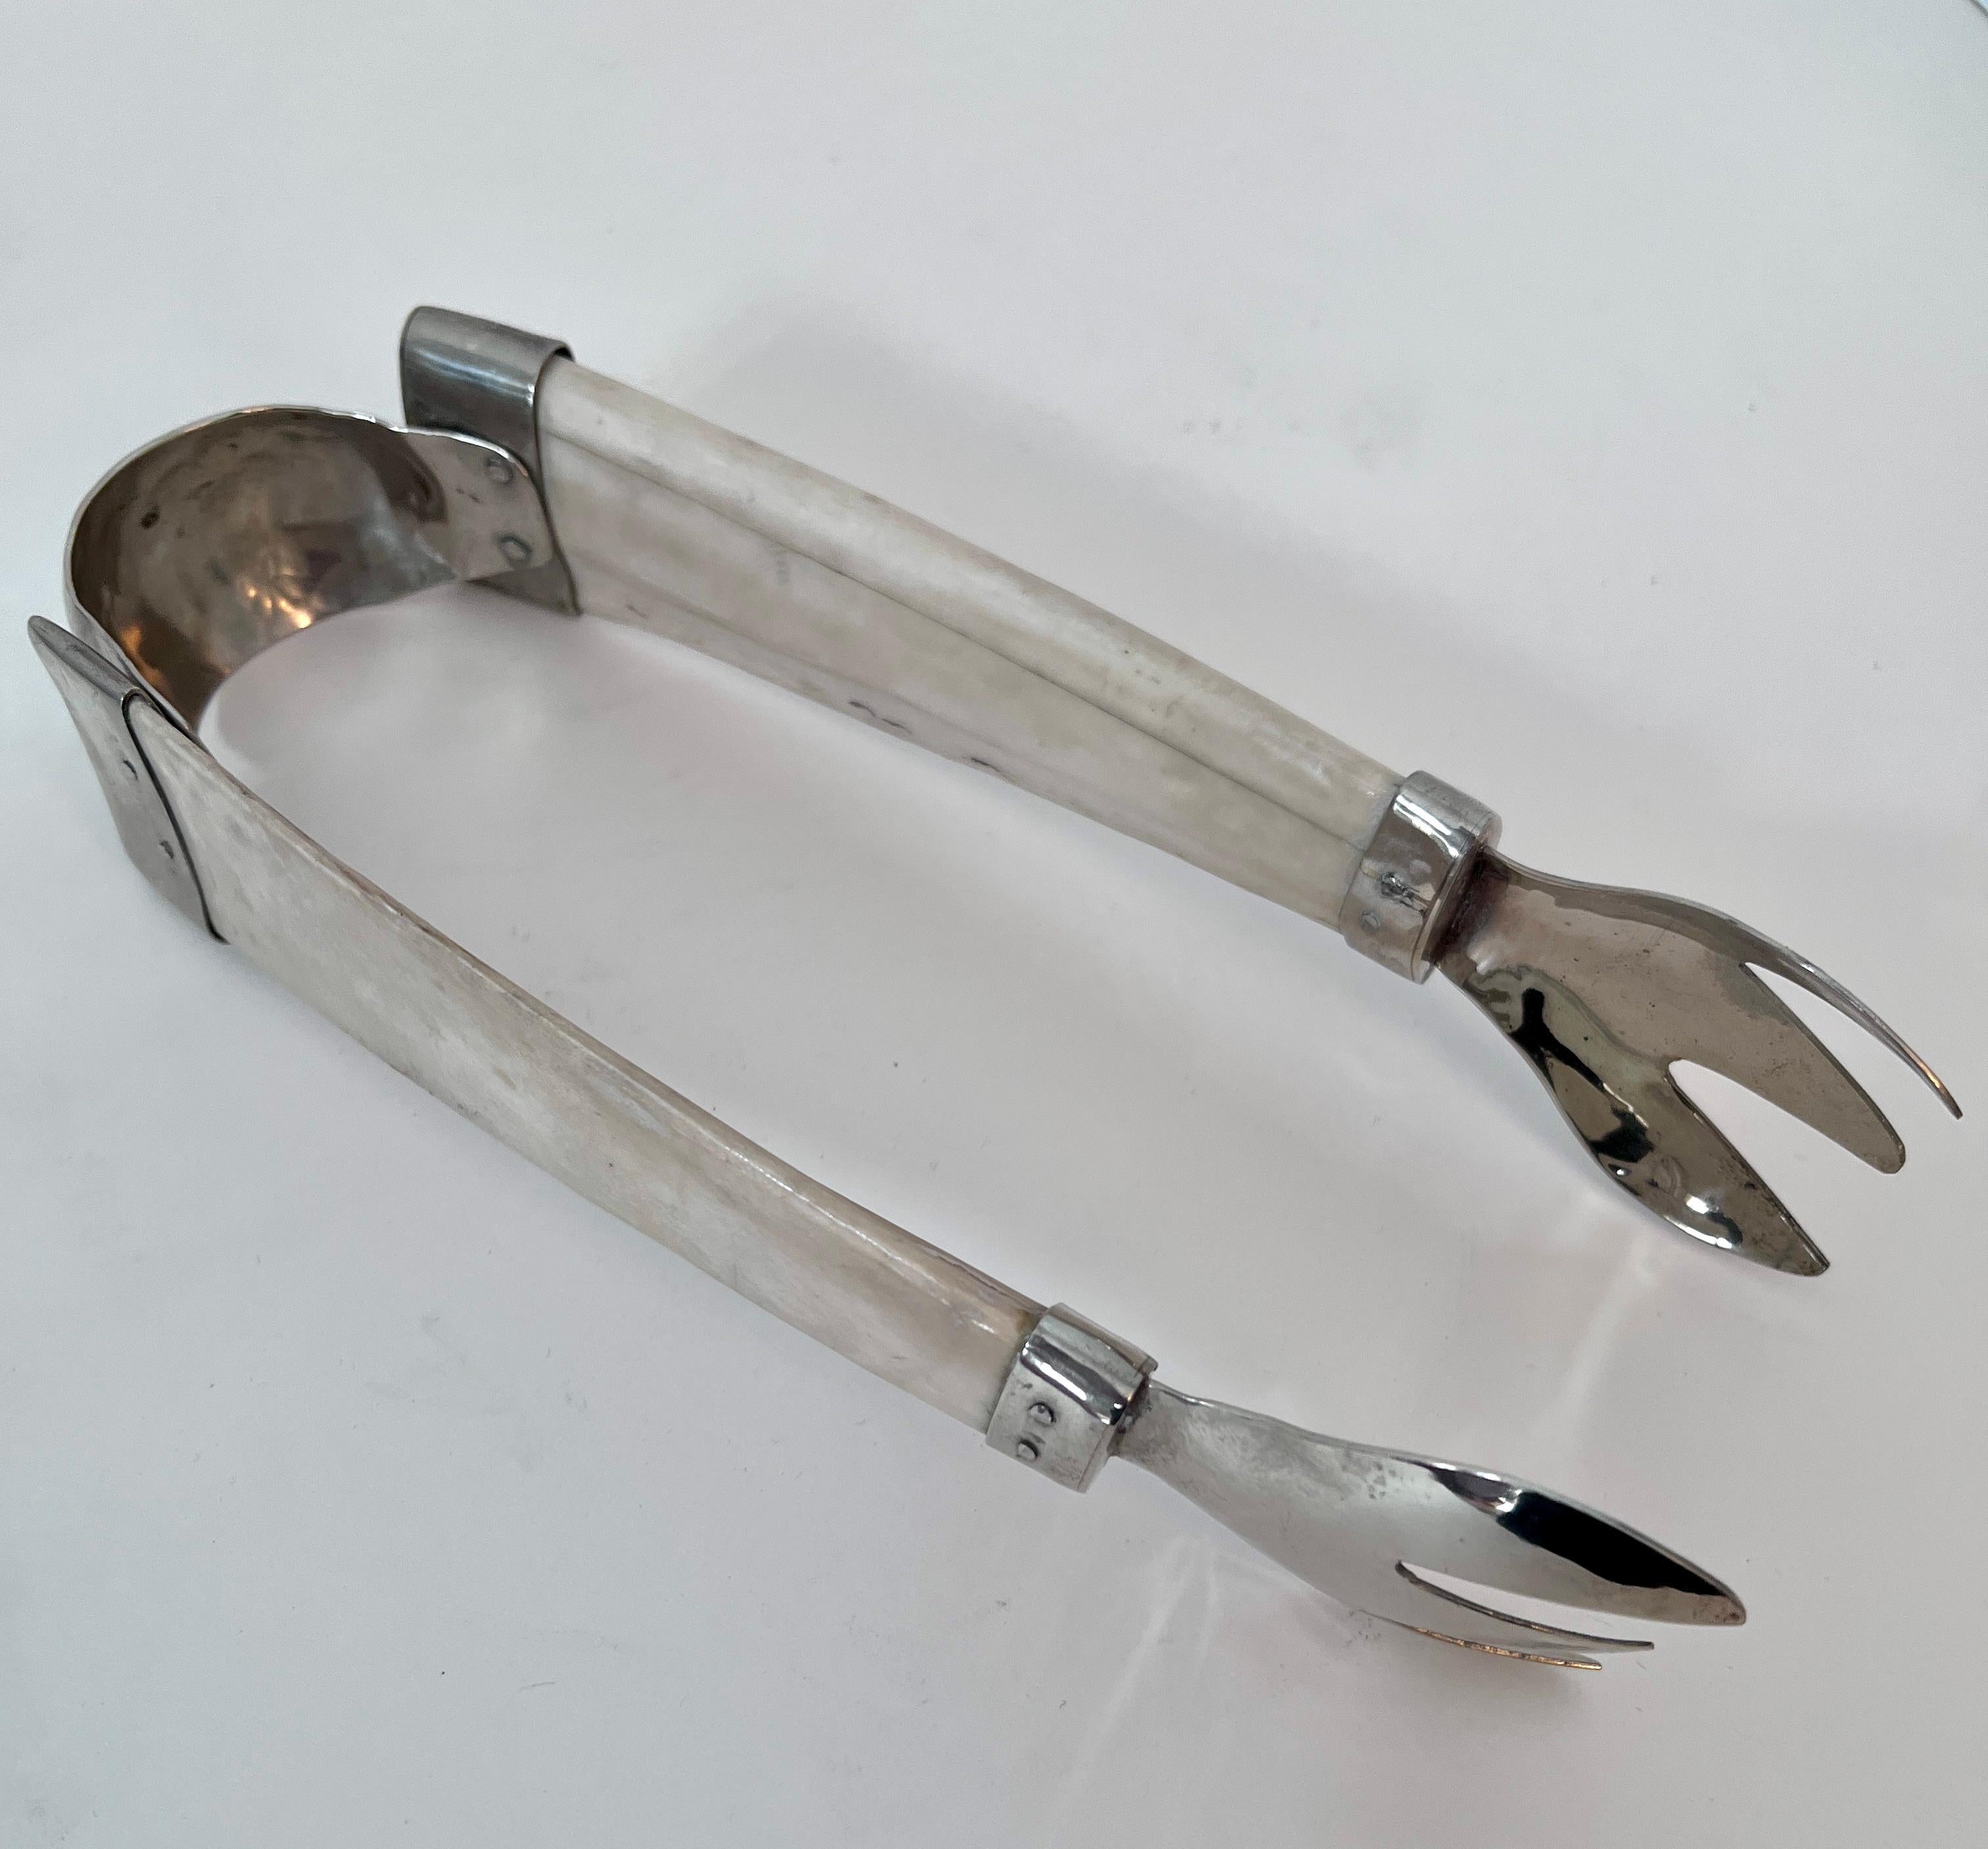 A wonderful pair of Ice Tongs made of bone and silver plate.  A compliment to any sophisticated bar.  A beautiful and unique piece.

The attention to hand detailed craftsmanship is seen throughout.